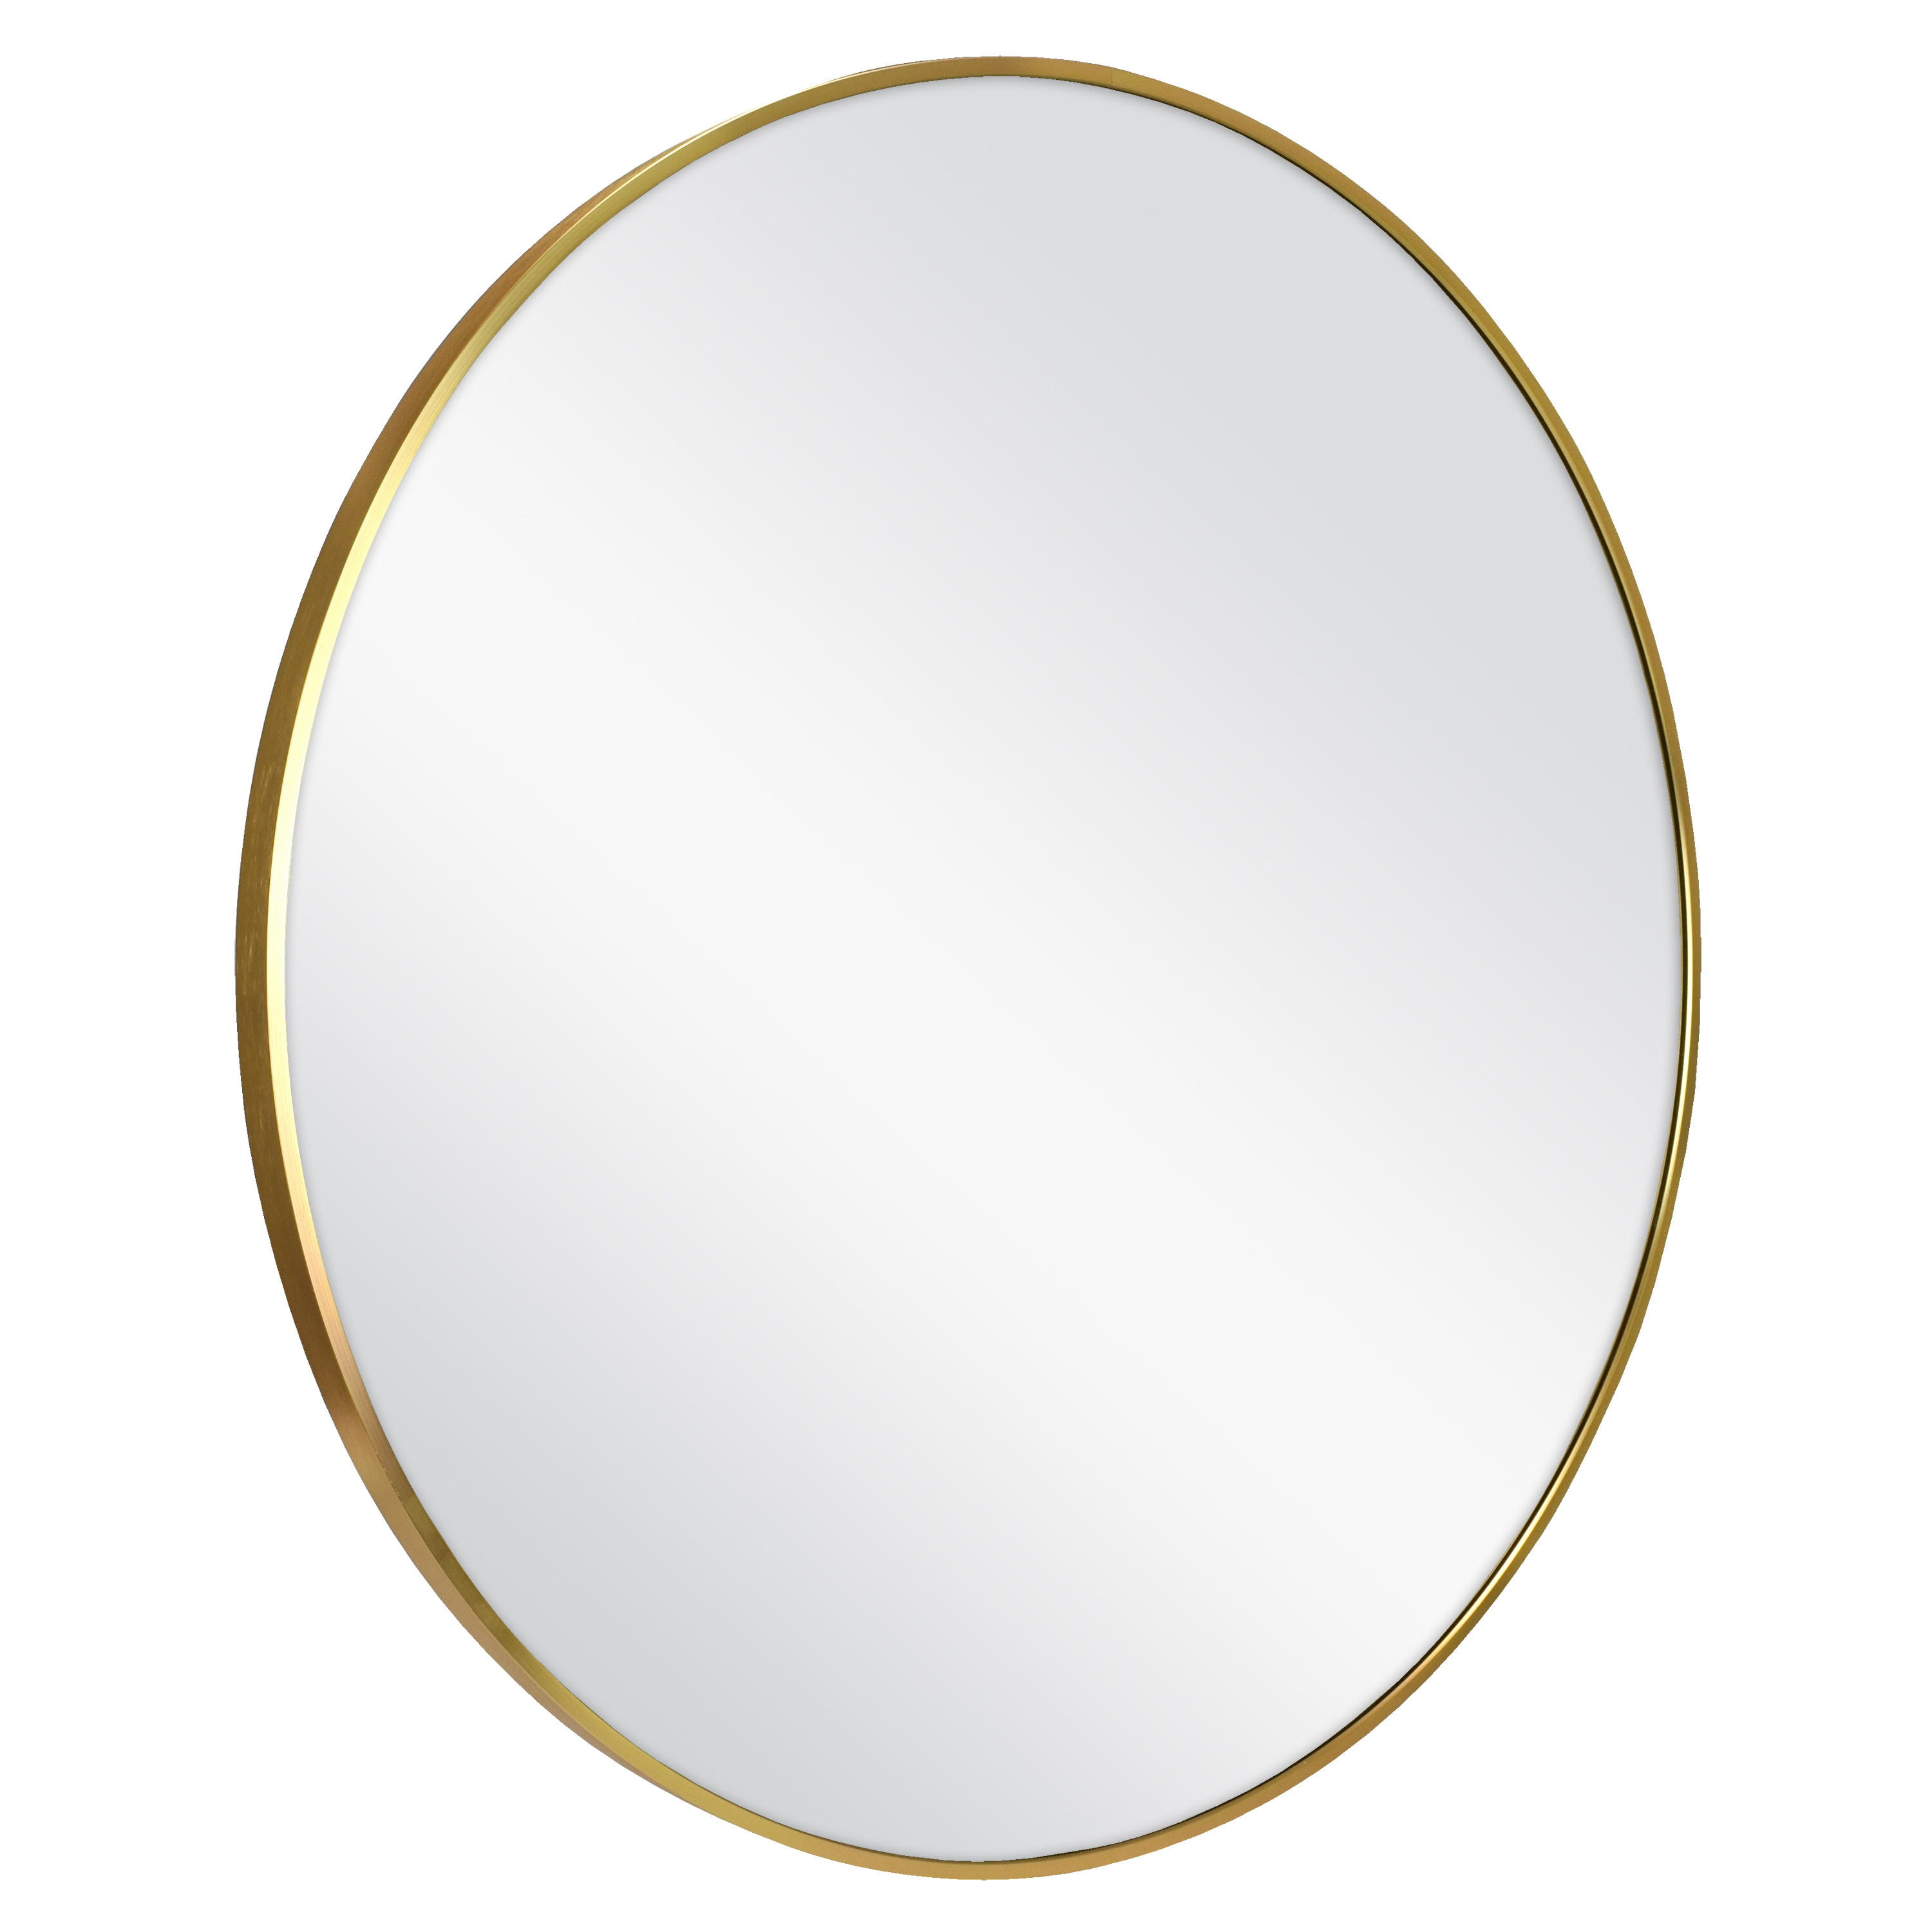 Better Homes & Gardens 28" x 28" Gold Glam, Modern and Bohemian Vanity Mirror - image 2 of 6